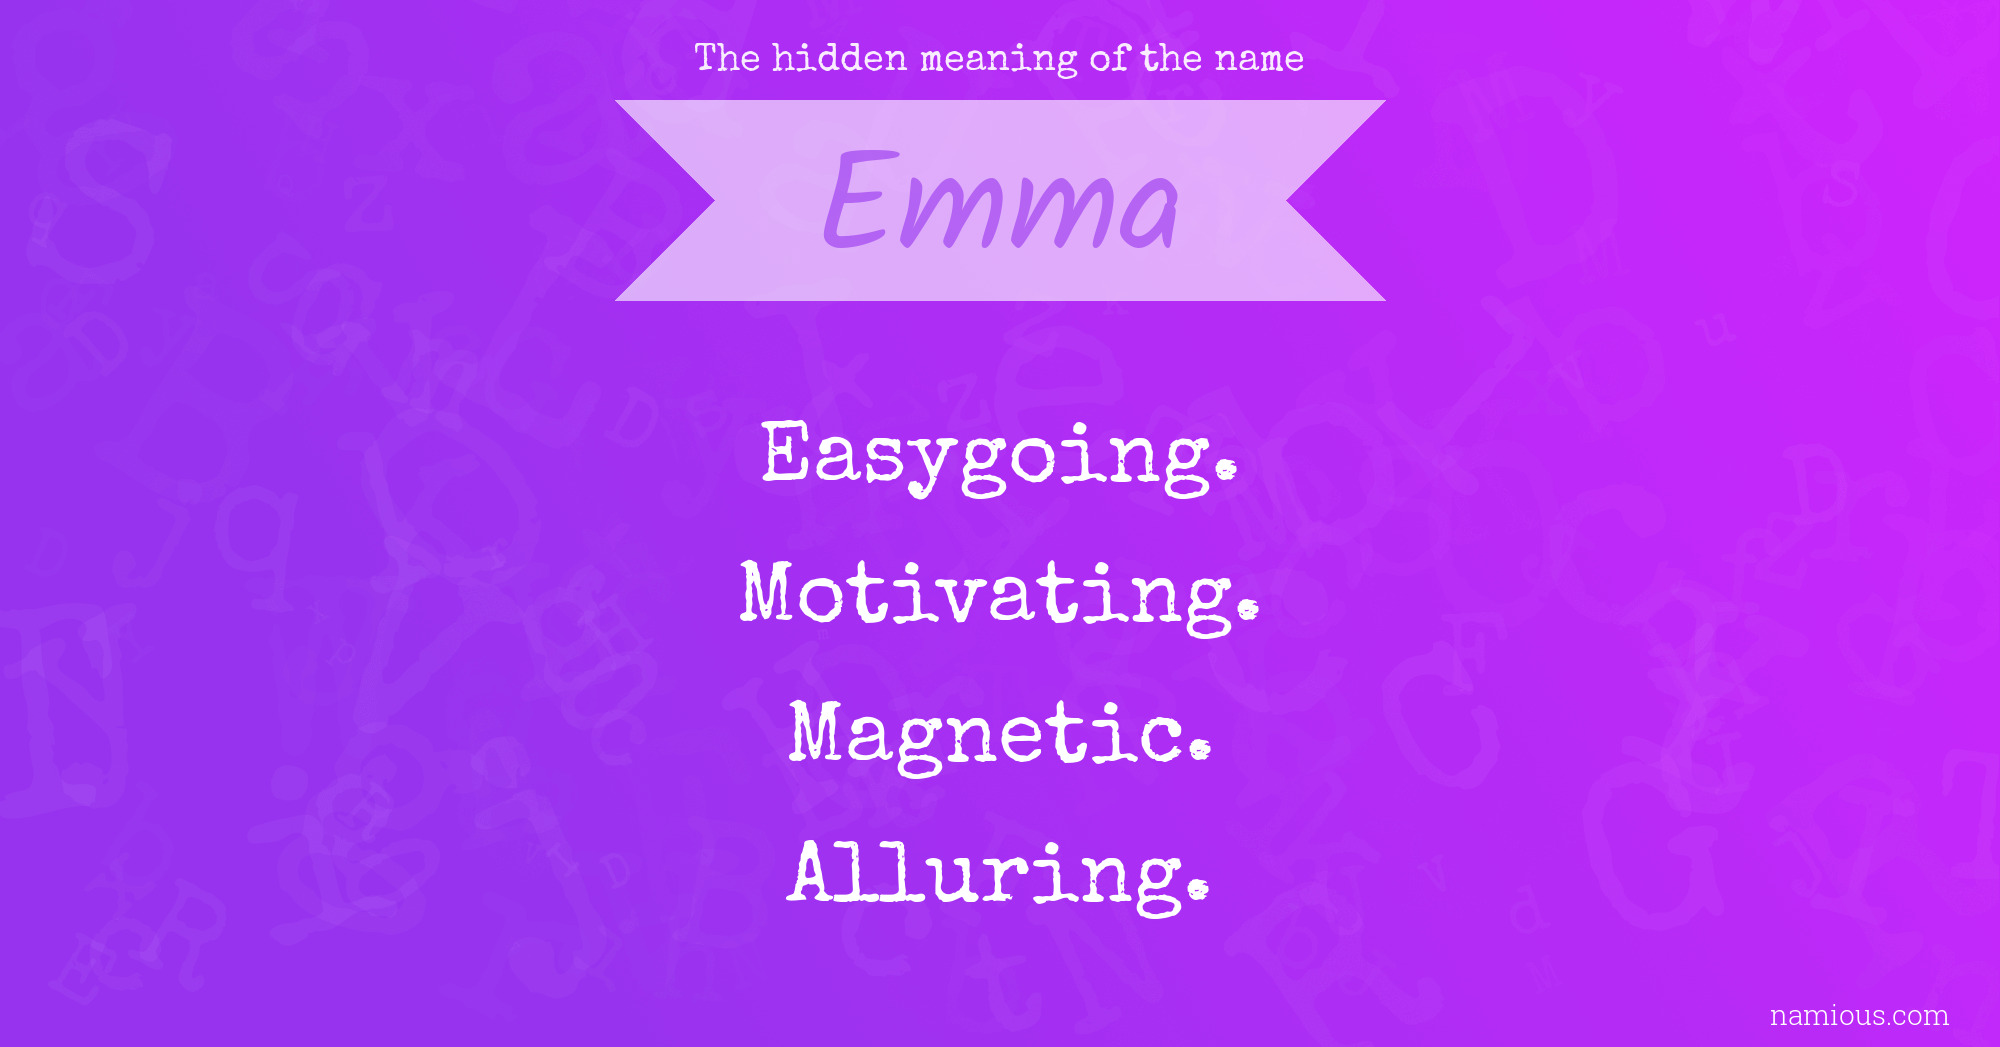 The hidden meaning of the name Emma